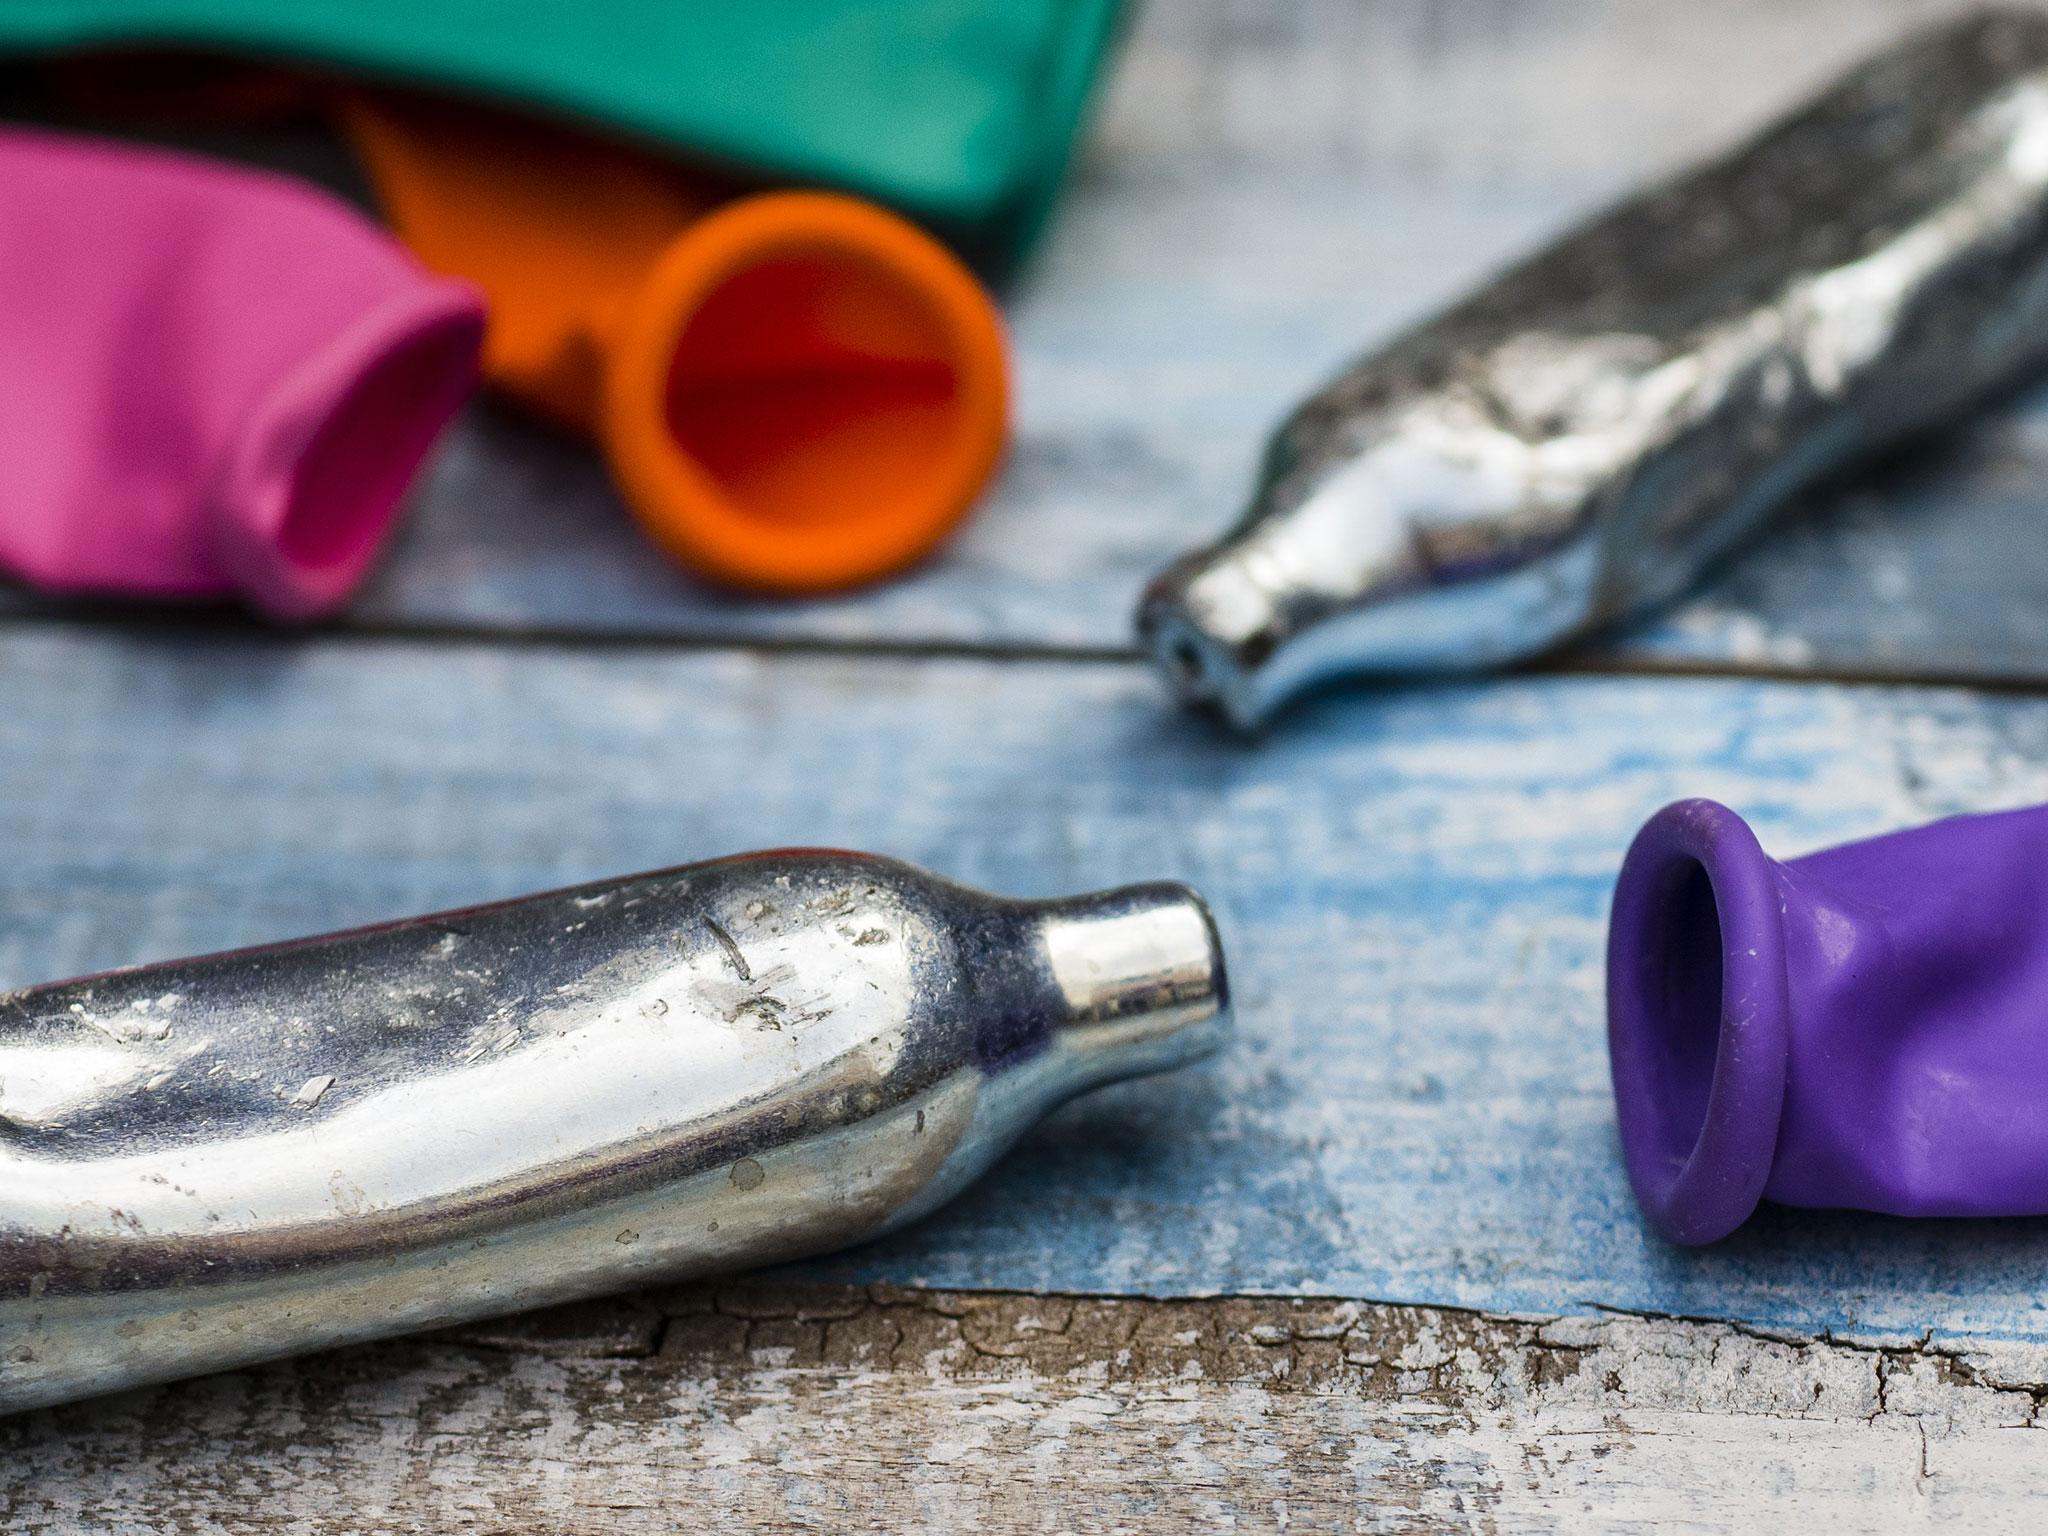 Laughing gas, or nitrous oxide, has been becoming increasingly popular among younger people (via Rex Features)